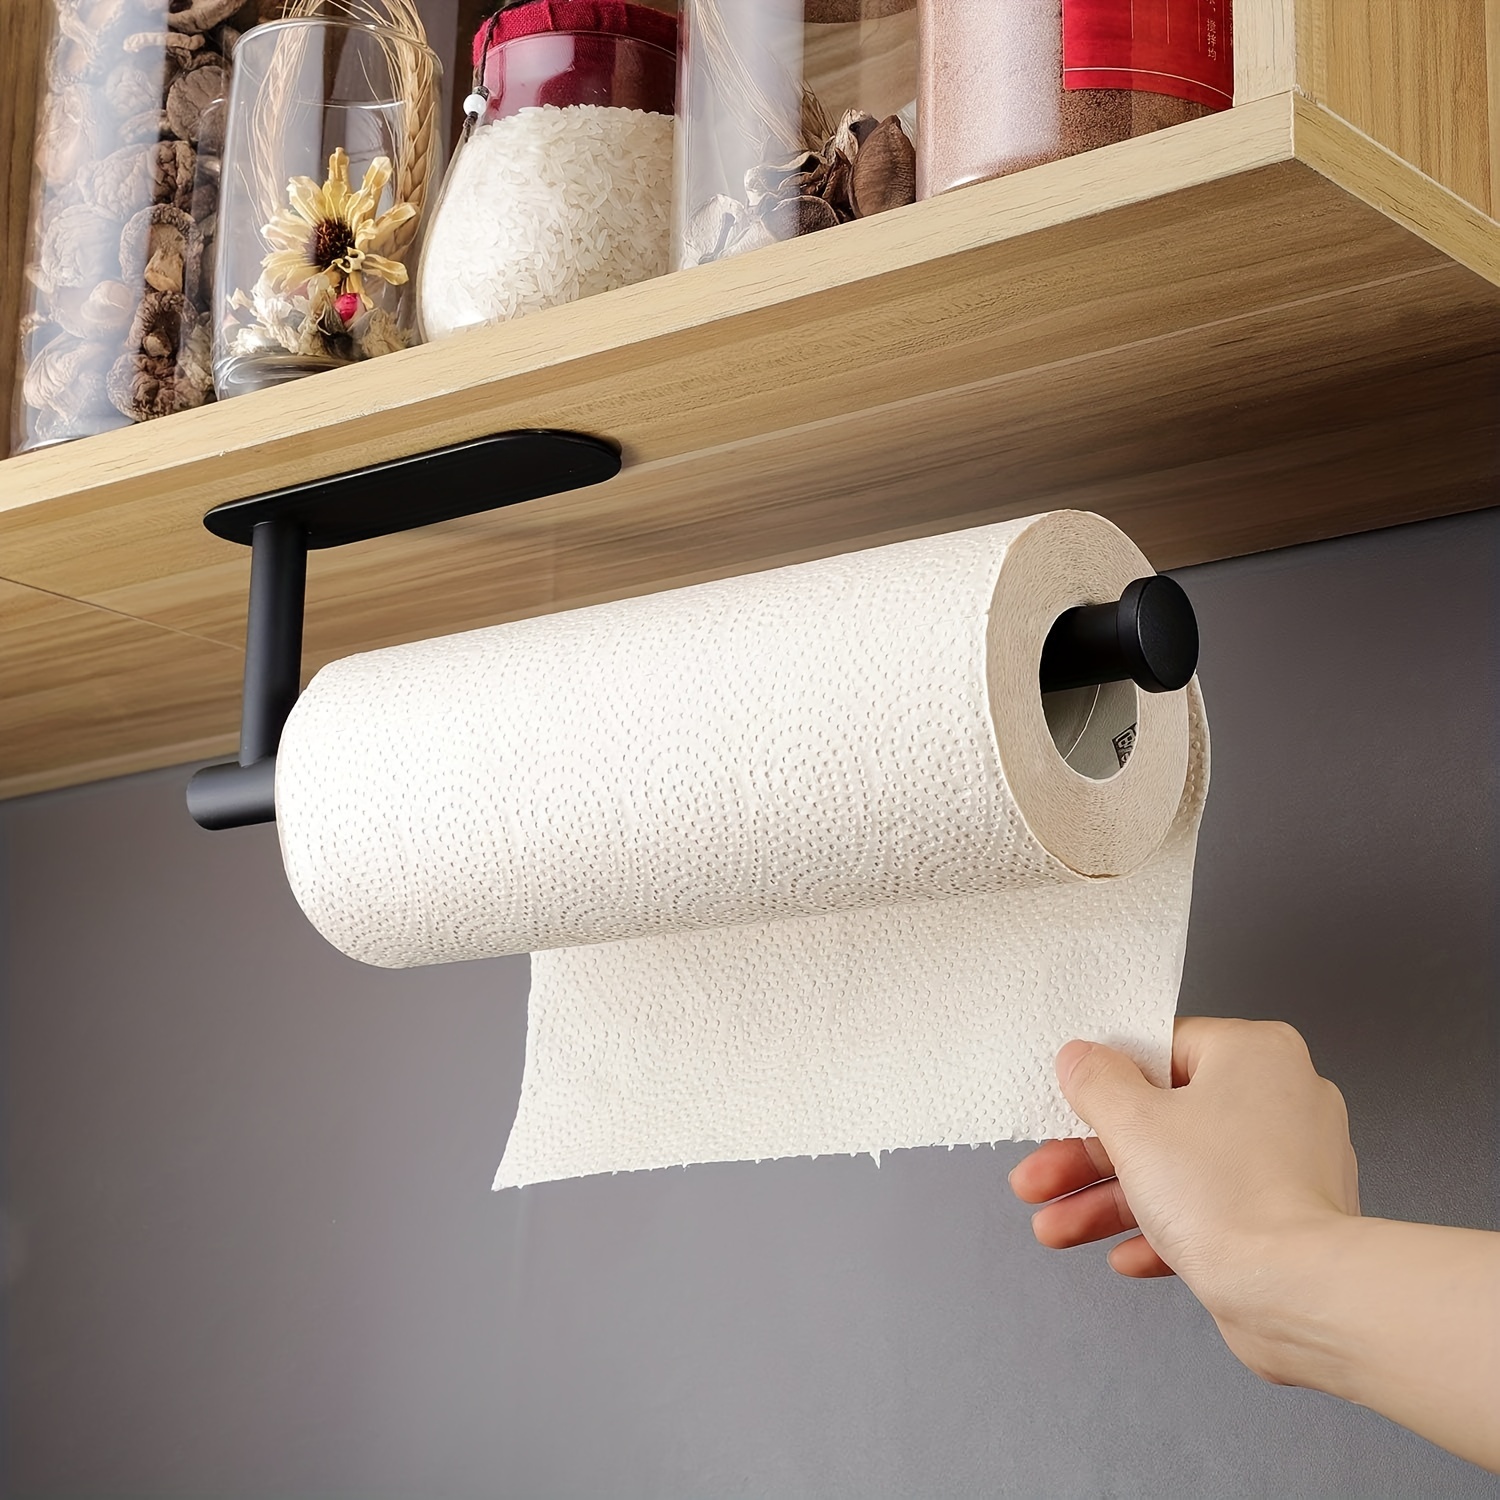 Hanging Paper Roll Towel Holder Bathroom Toilet Storage Stand Kitchen  Organizer Napkin Rack Stainless Steel Adhesive Wall Mount